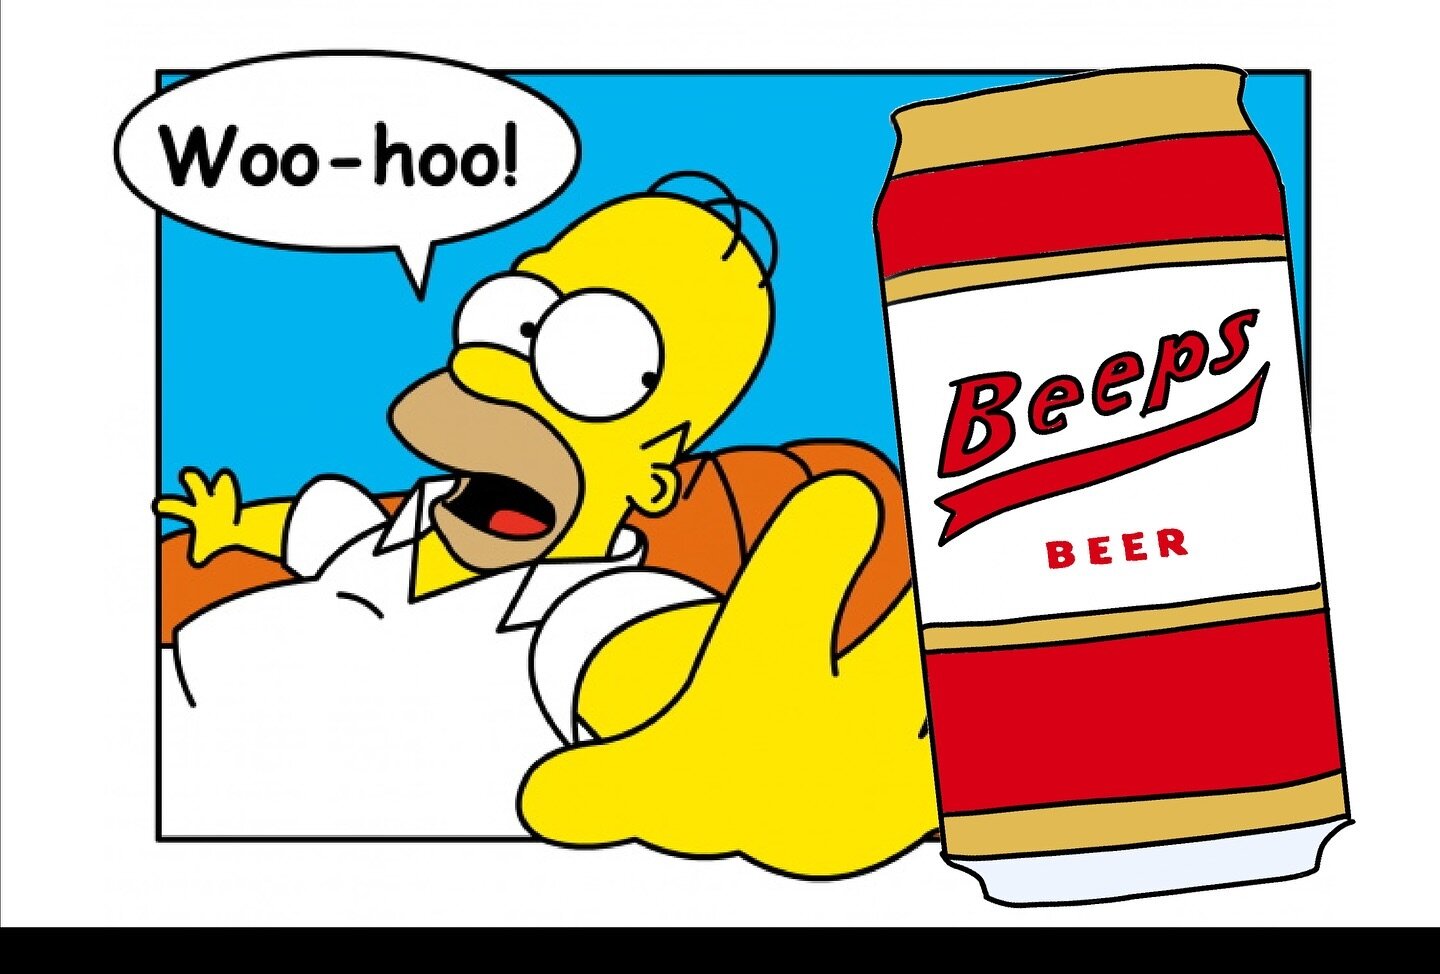 Join our Simpson trivia in Decatur tonight, April 4th at 8pm, as we challenge you with questions from Springfield&rsquo;s wacky universe like, &lsquo;What was Bart&rsquo;s favorite beer?&rsquo; Hint: It&rsquo;s got to be Beeps!